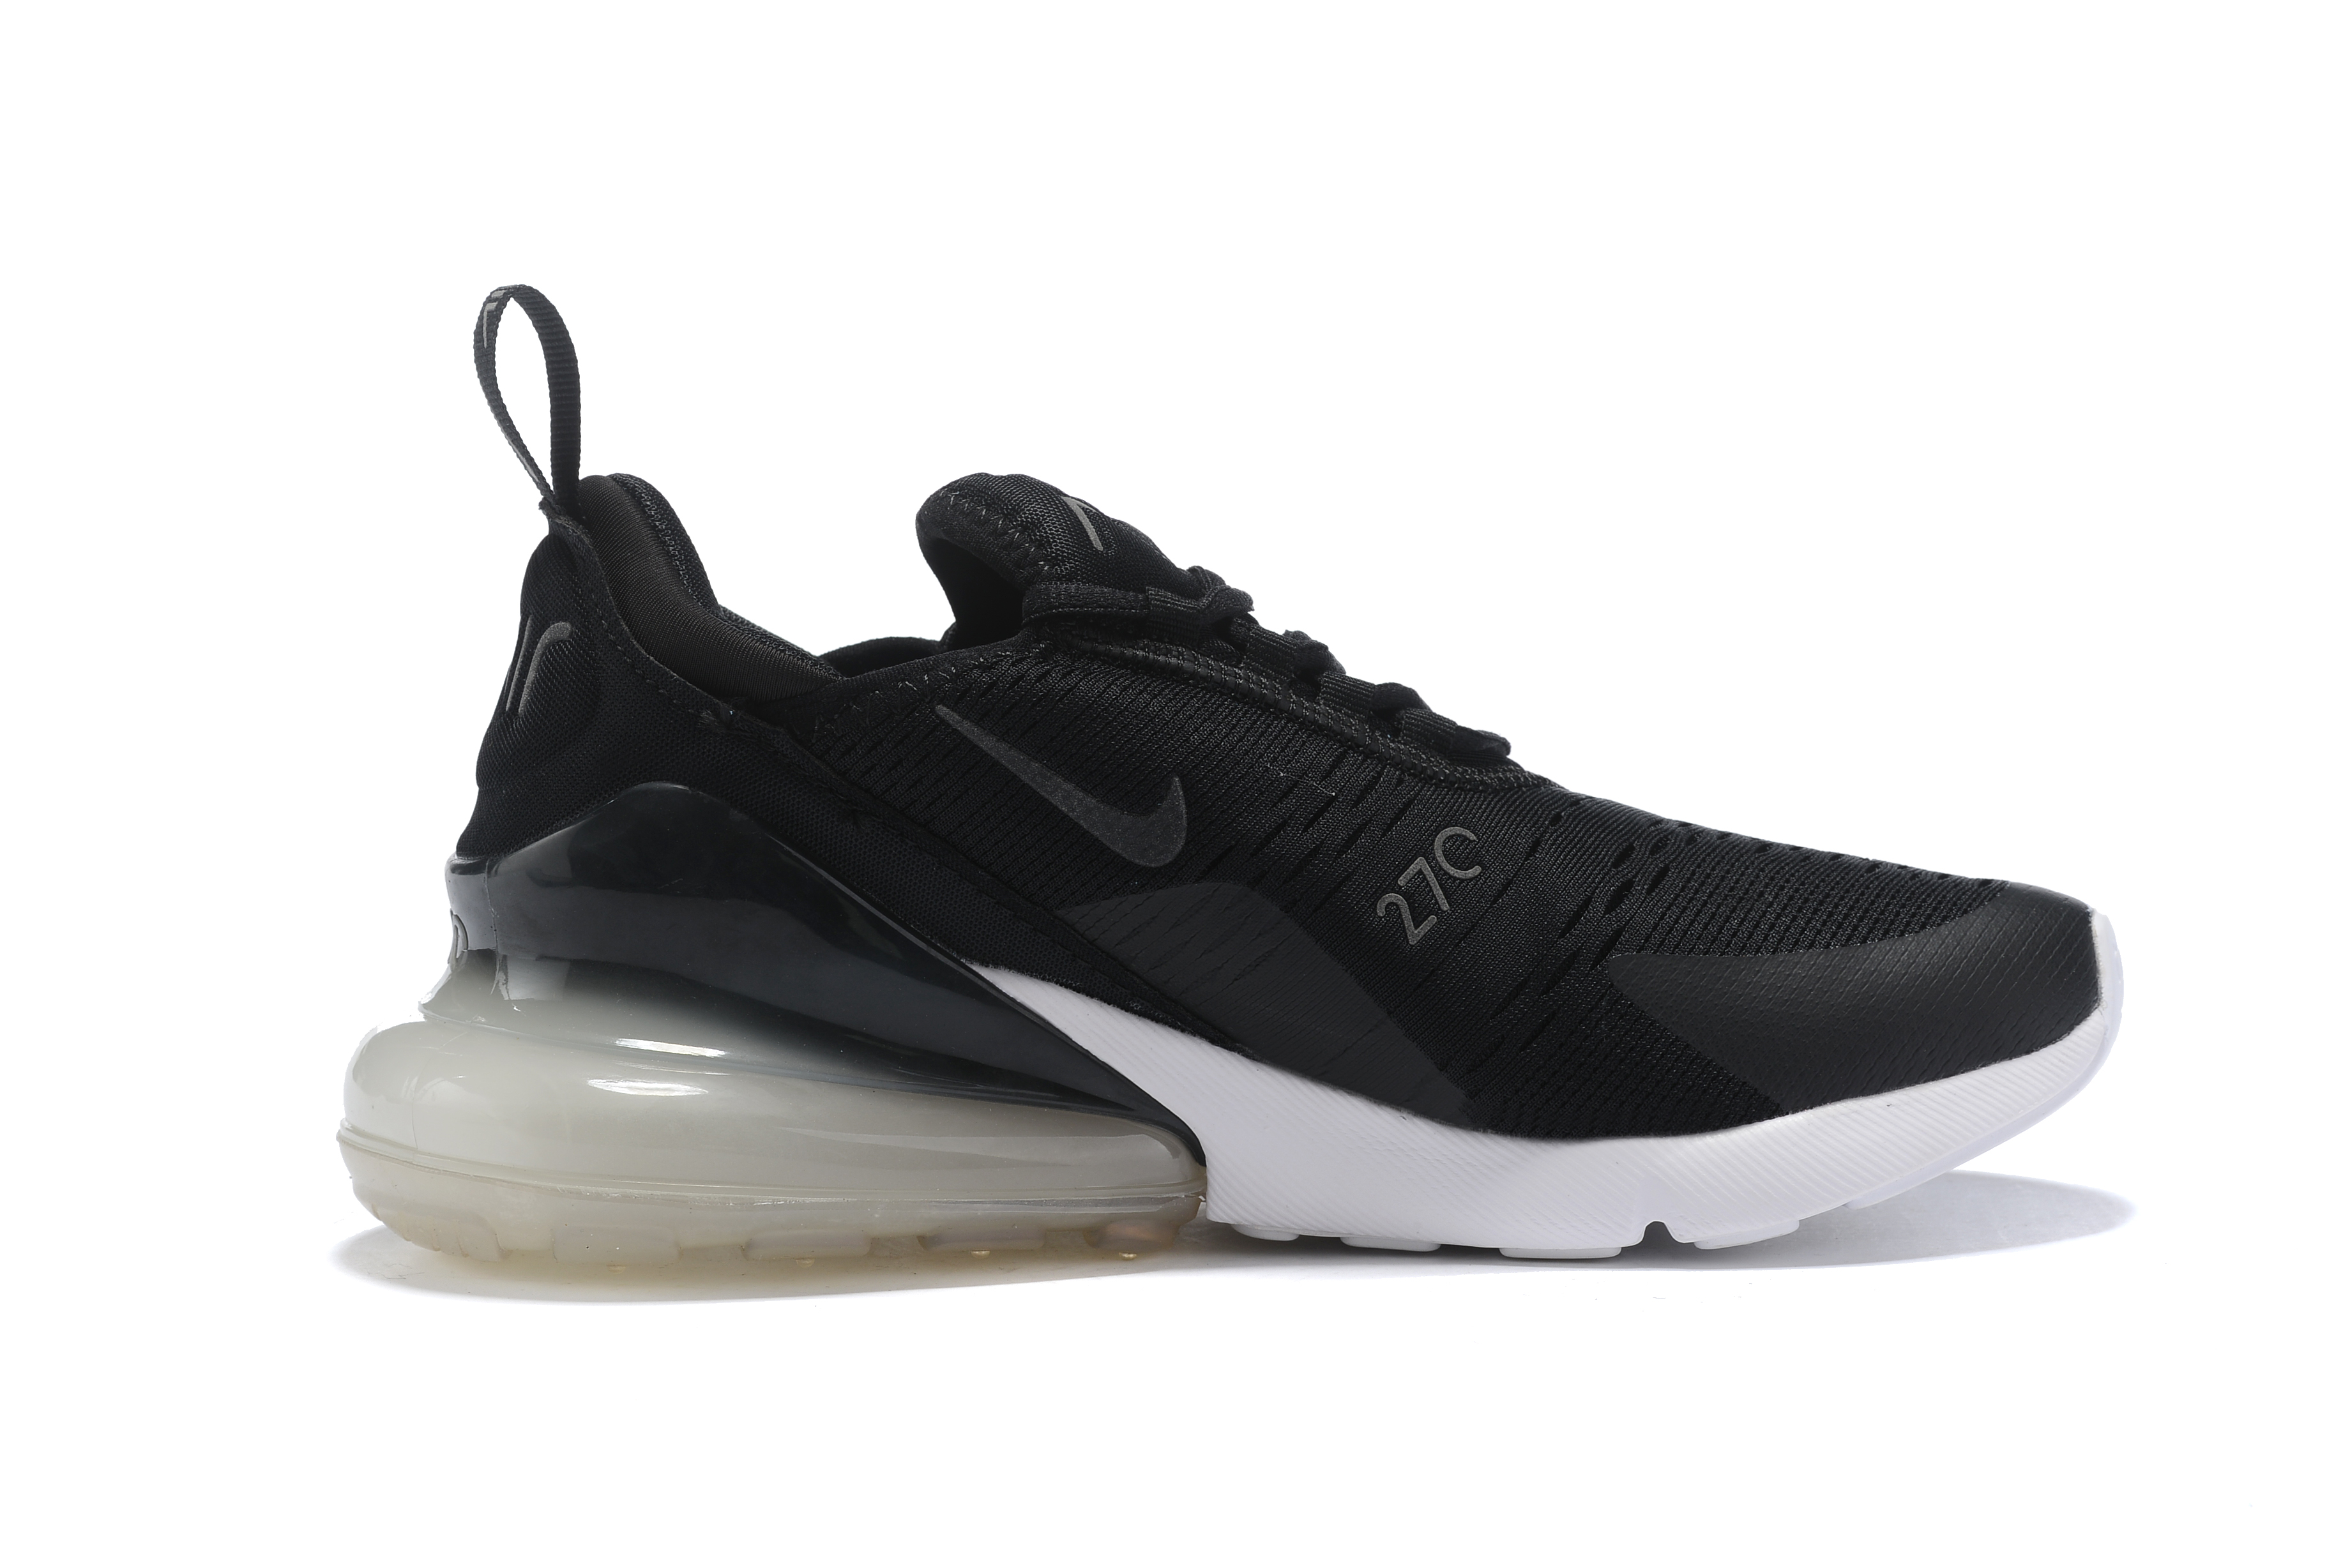 Nike Air Max 270 Midnight Black White Shoes - Click Image to Close